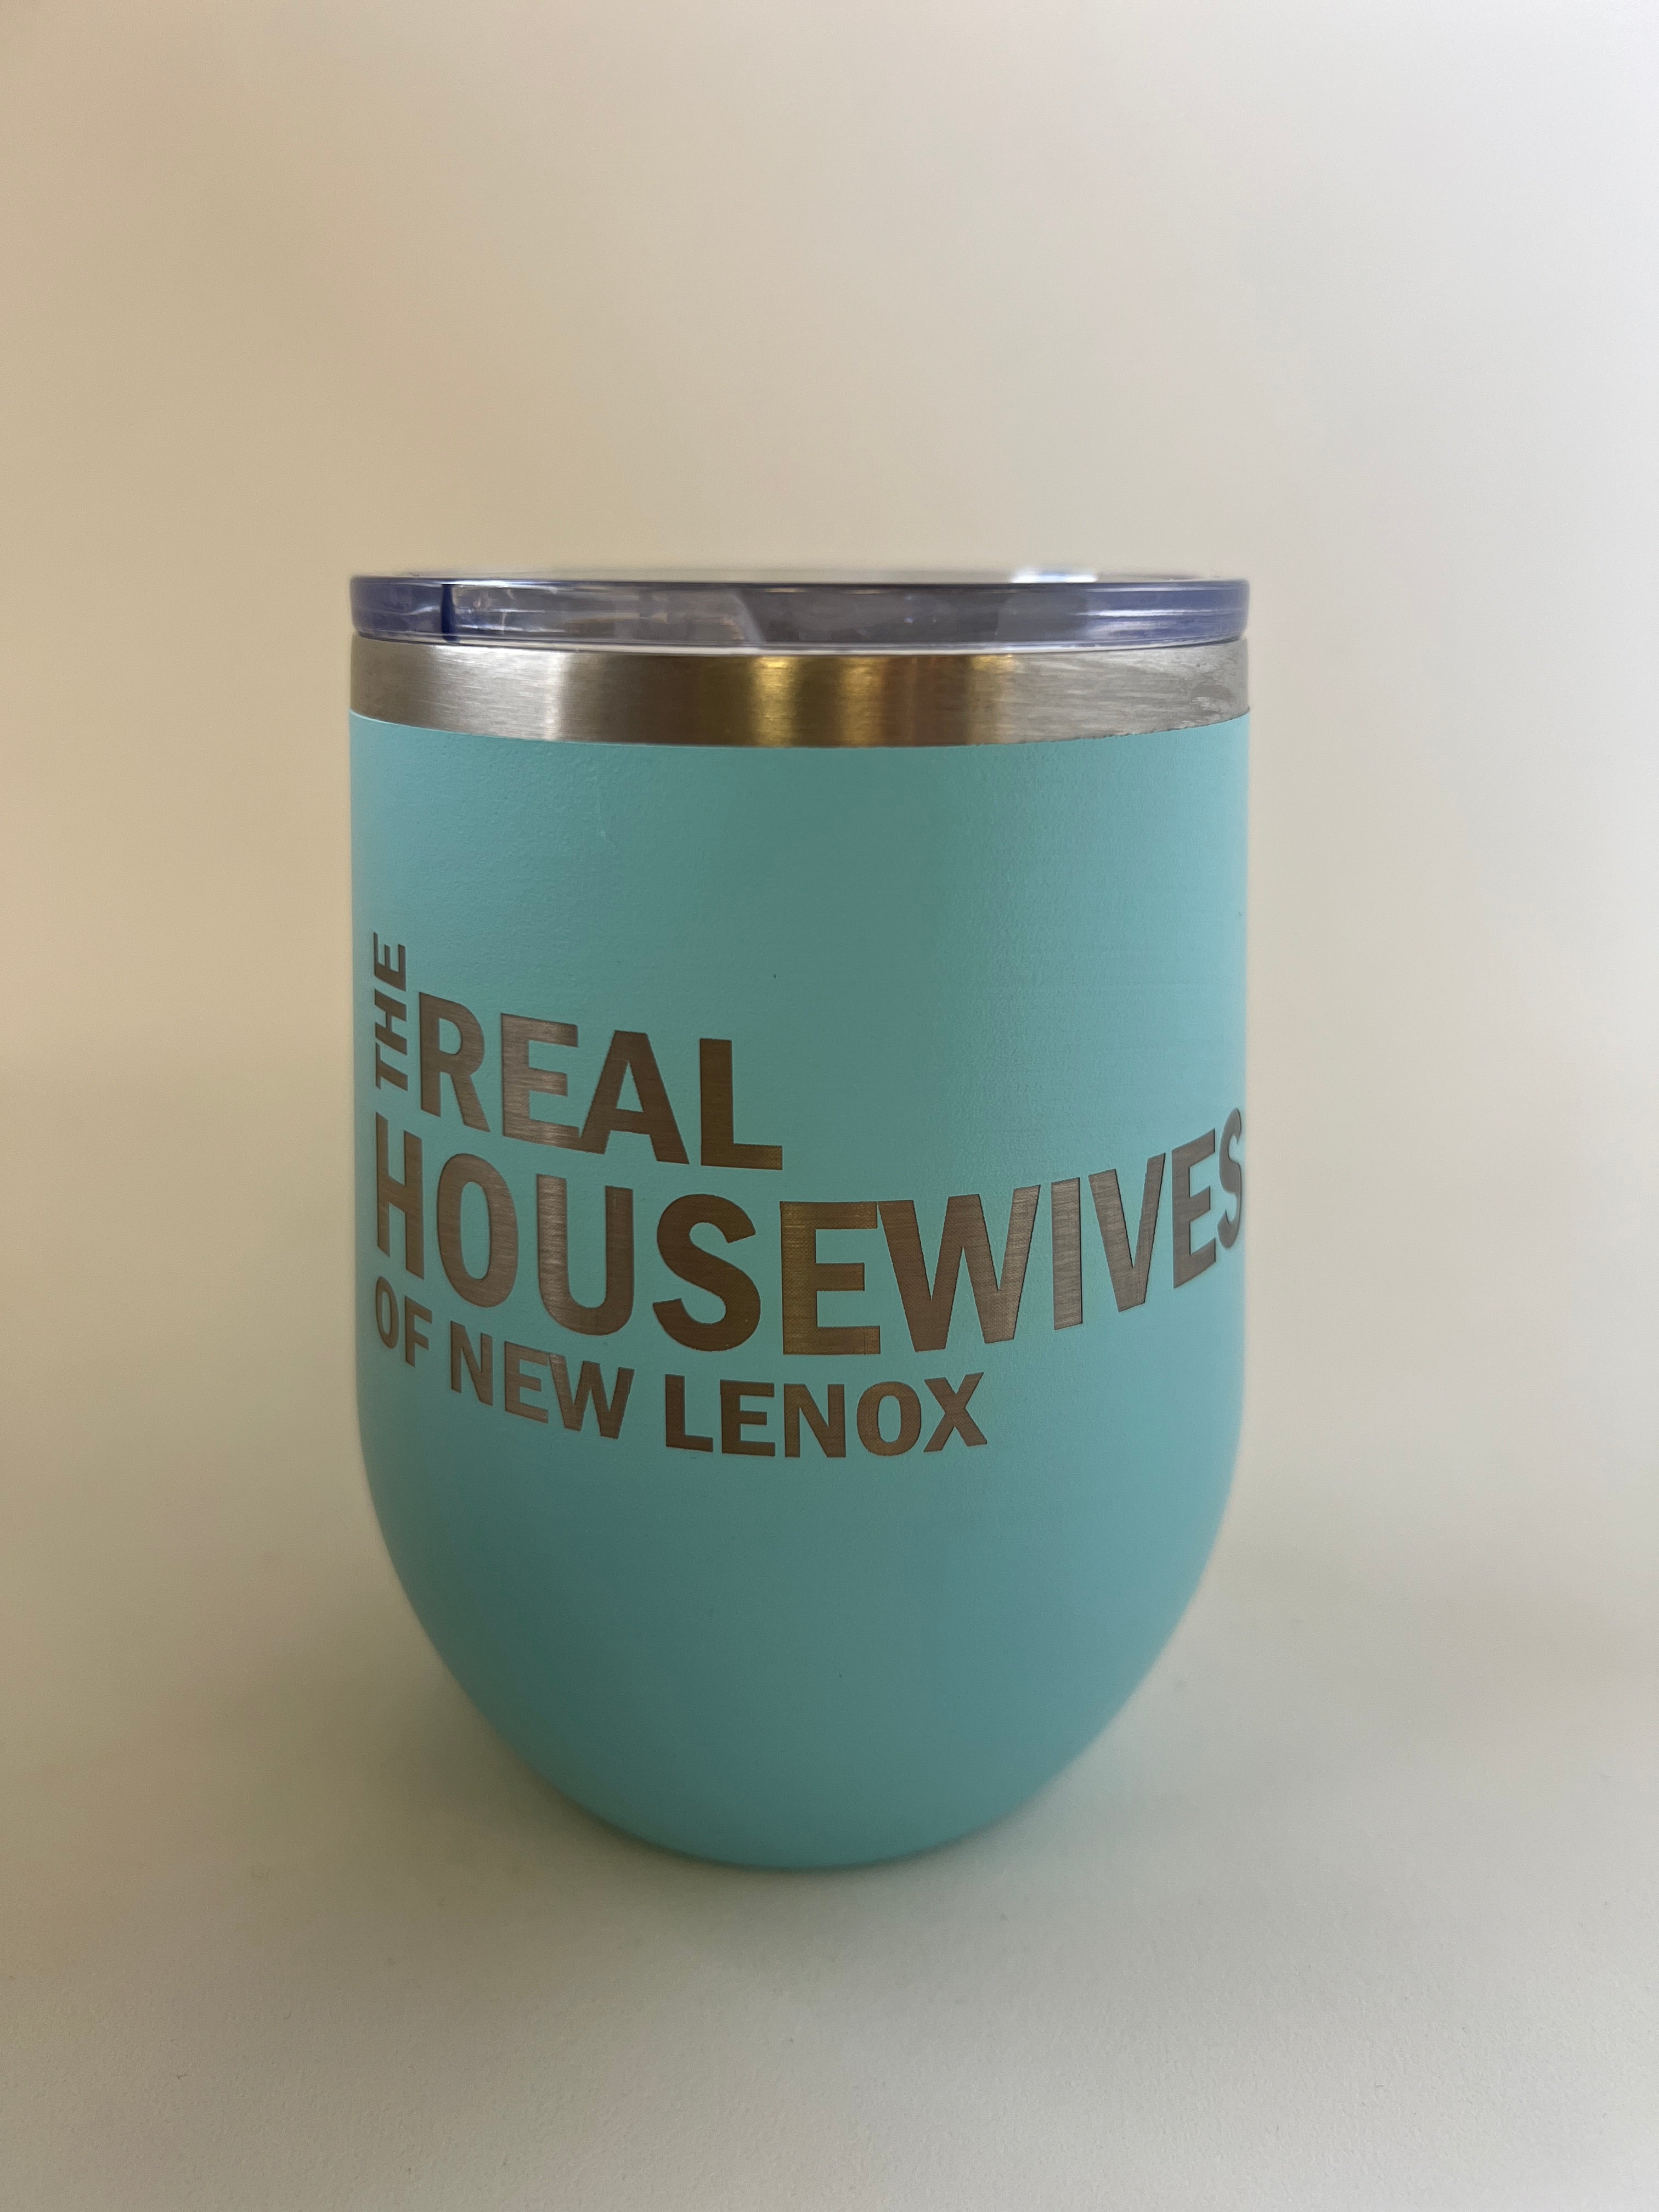 Real Housewives Tumbler (Frankfort, Orland Park, Homer Glen, Tinley Park, New Lenox and Mokena))